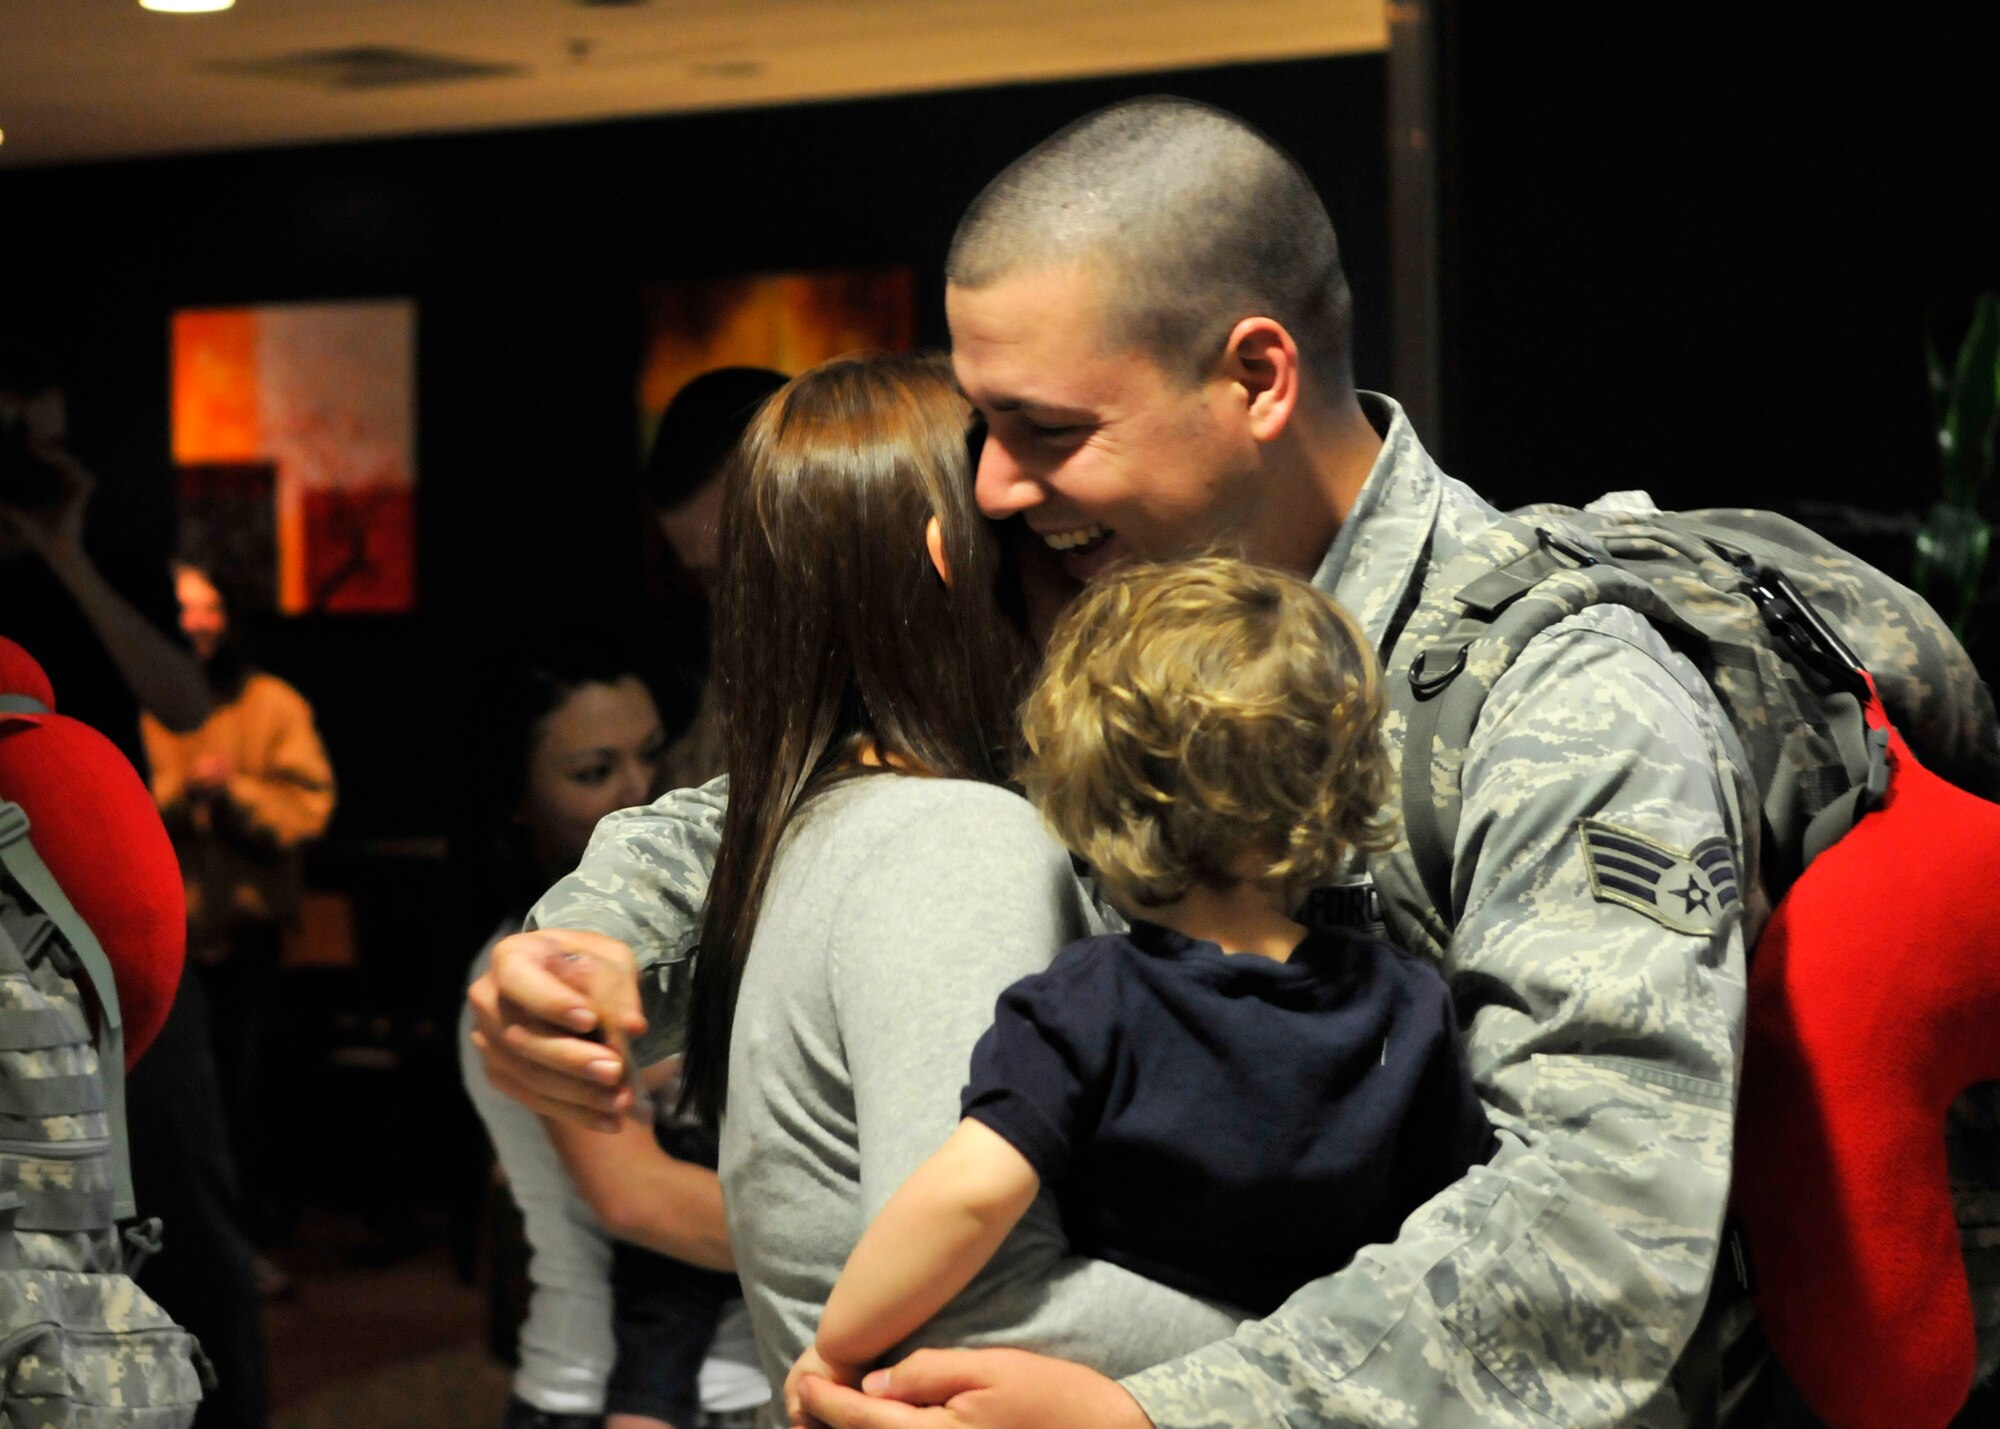 FORT WAYNE AIR NATIONAL GUARD BASE, Ind. – Senior Airman Aaron Strebig, 122nd Fighter Wing, Security Forces, embraces his family as the 122nd Fighter Wing welcomed home more than two-dozen members from the 122nd Security Forces Squadron, as they returned from a six-month deployment in support of Operation Enduring Freedom, January 23, 2015 at the Fort Wayne International Airport.  Twenty-six Blacksnakes mobilized for this deployment and were assigned to the 379th Expeditionary Security Forces Squadron at Al Udeid Air Base, Qatar. The group spent one month in San Antonio conducting combat preparation, then transitioned to Qatar for six months. 